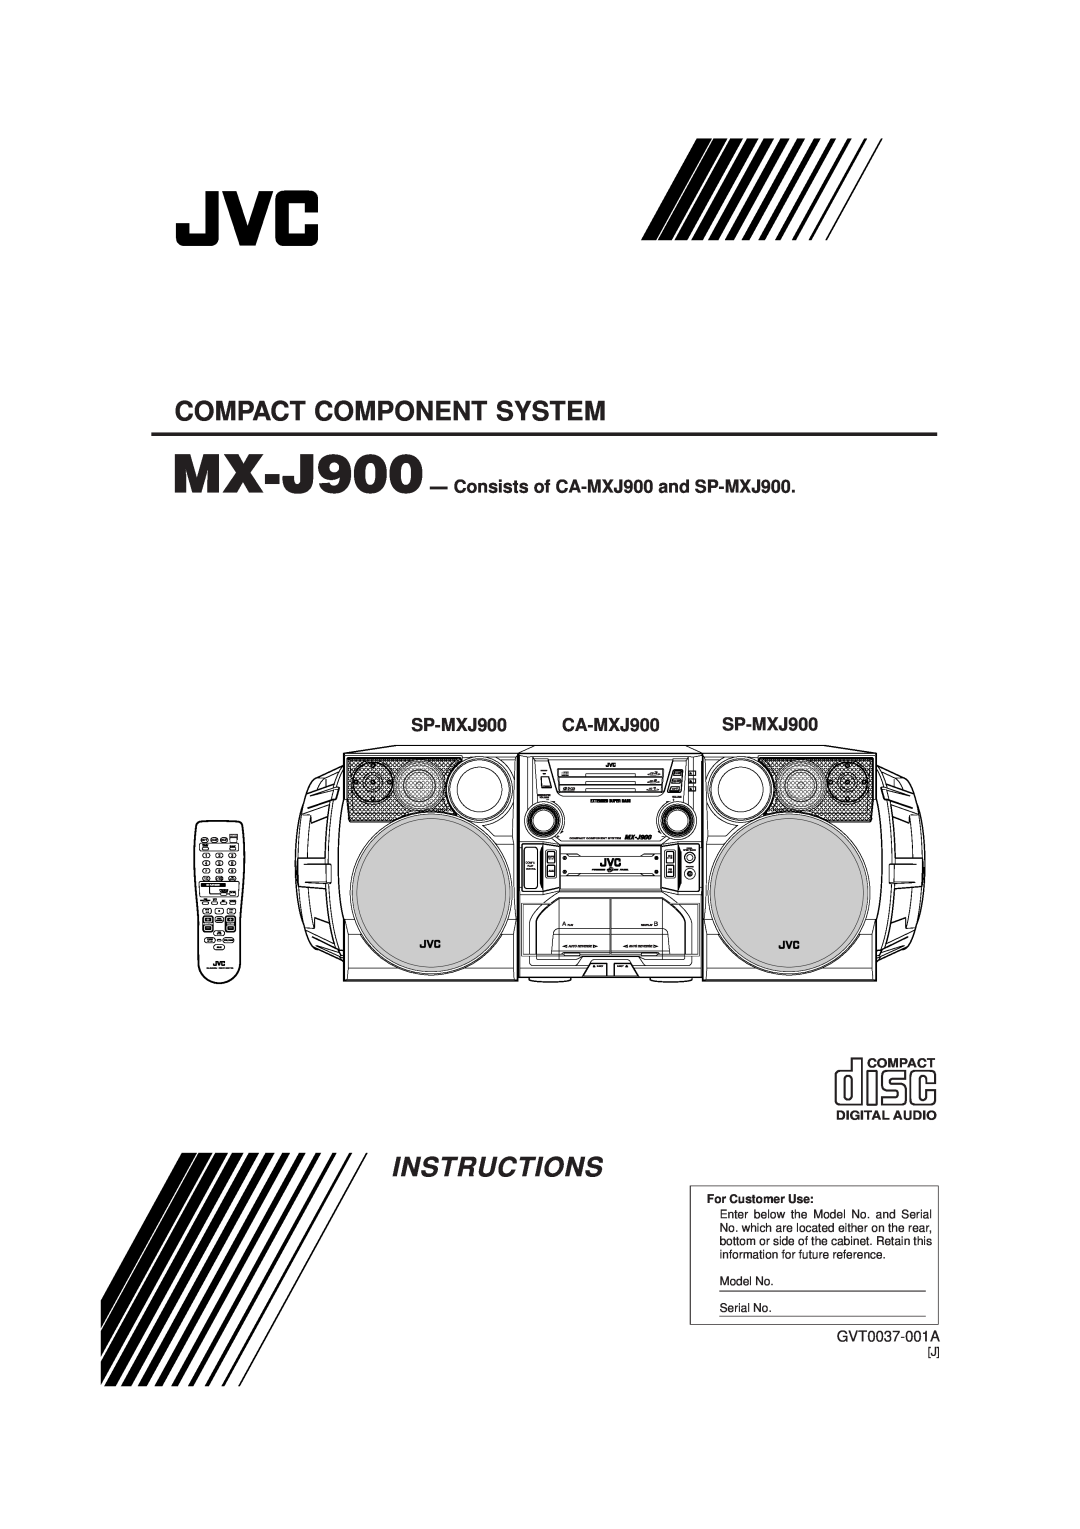 JVC manual Compact Component System, Instructions, MX-J900-Consists of CA-MXJ900and SP-MXJ900, GVT0037-001A 